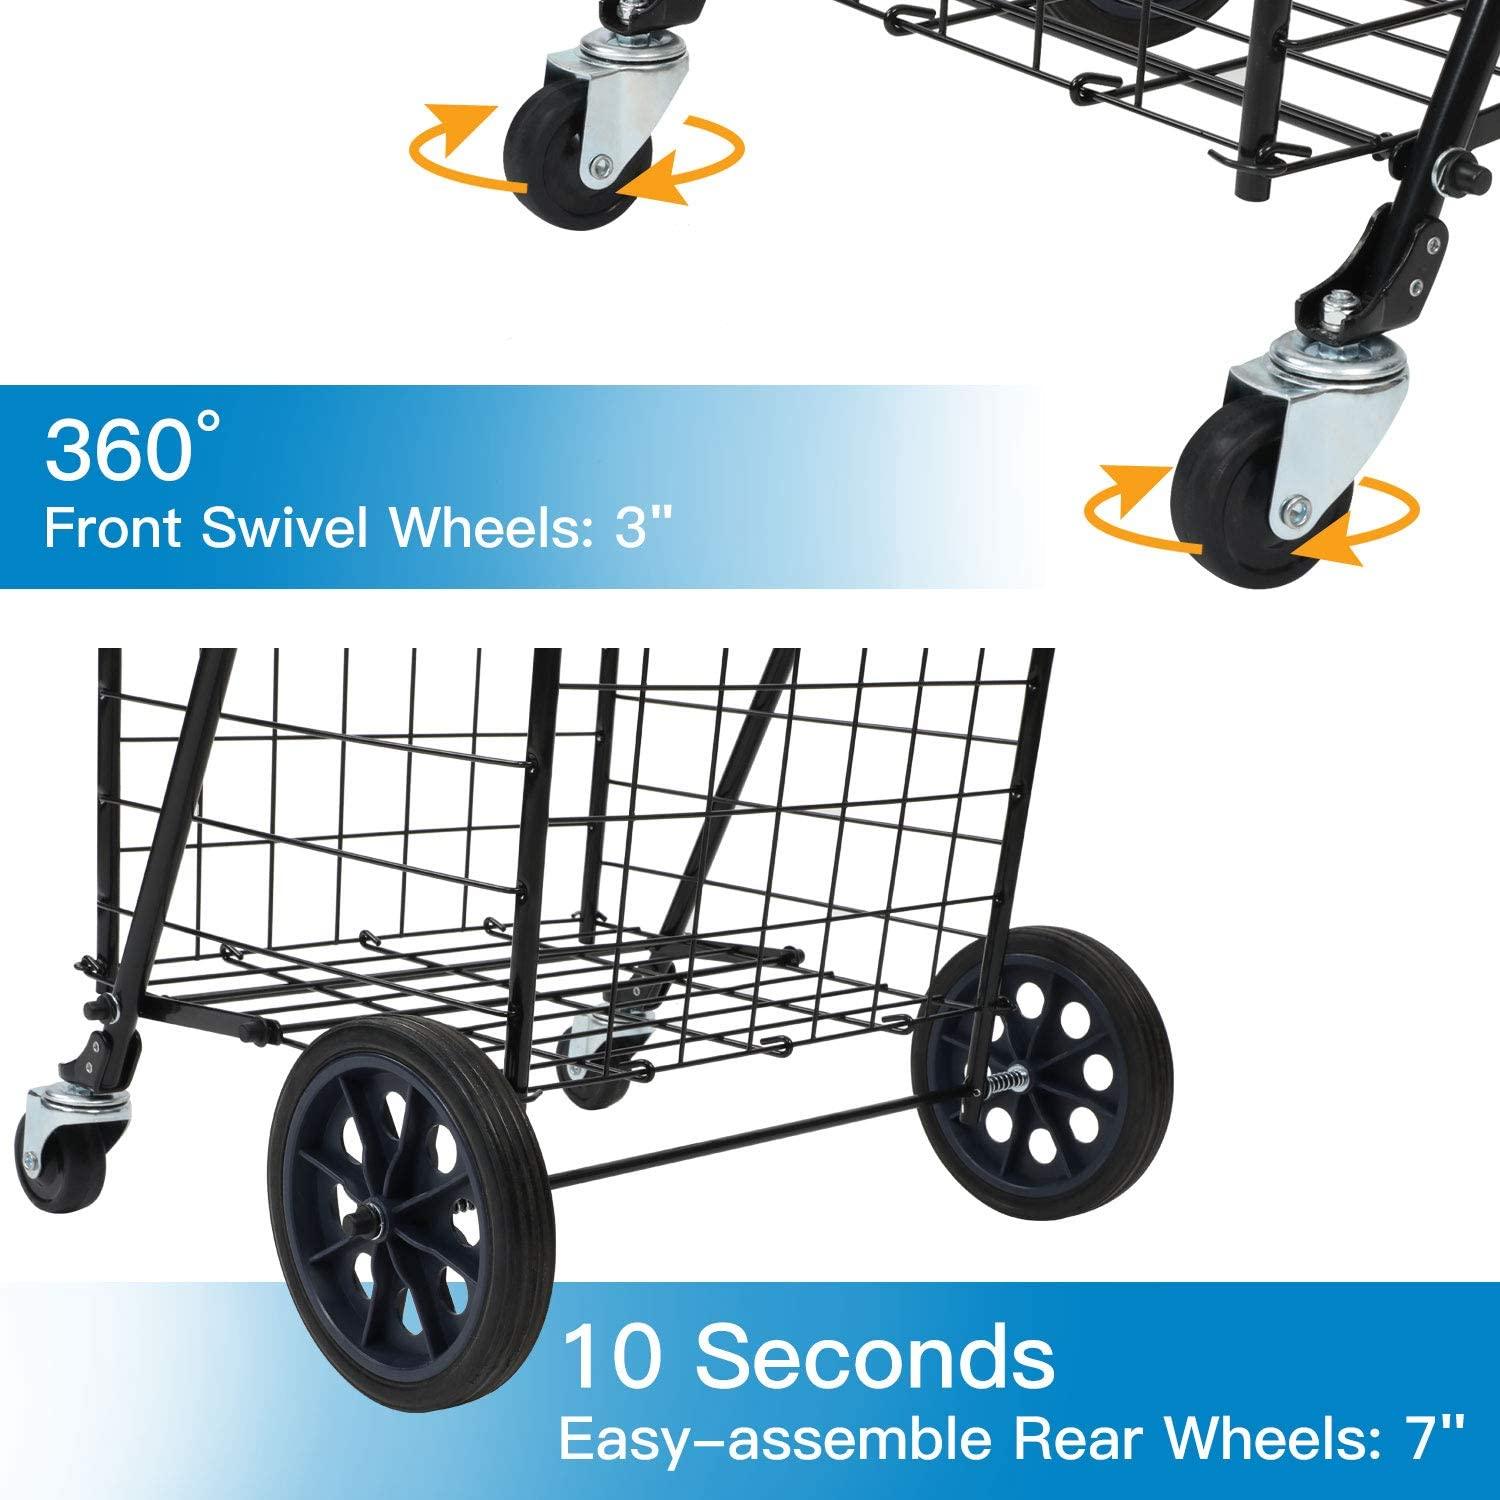 Shopping Cart with Dual Swivel Wheels for Groceries - Compact Folding Portable Cart Saves Space - with Adjustable Handle Height - Lightweight Easy to Move Holds up to 70L/Max 66Ibs - TheGivenGet